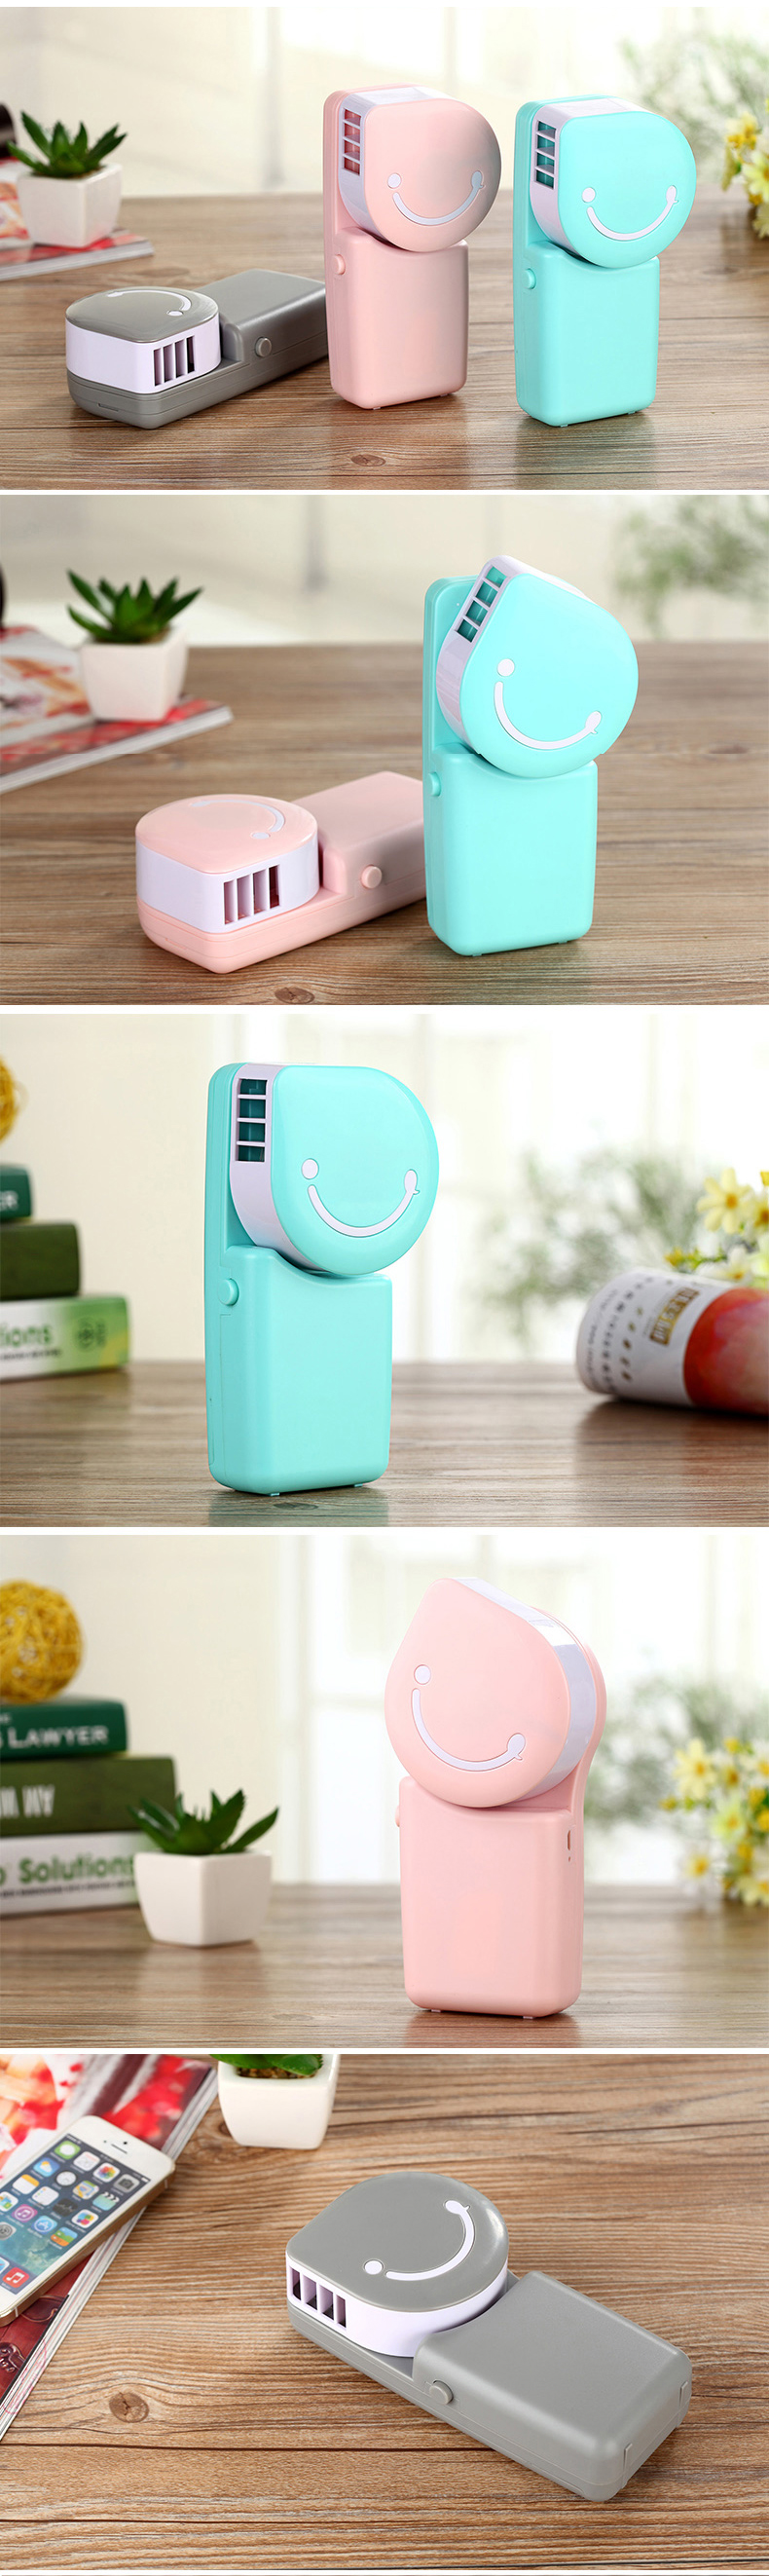 Loskii LX-882 Summer Mini Fan Cooling Portable Air Conditioning USB Charge Hand-held Cool Fan 10